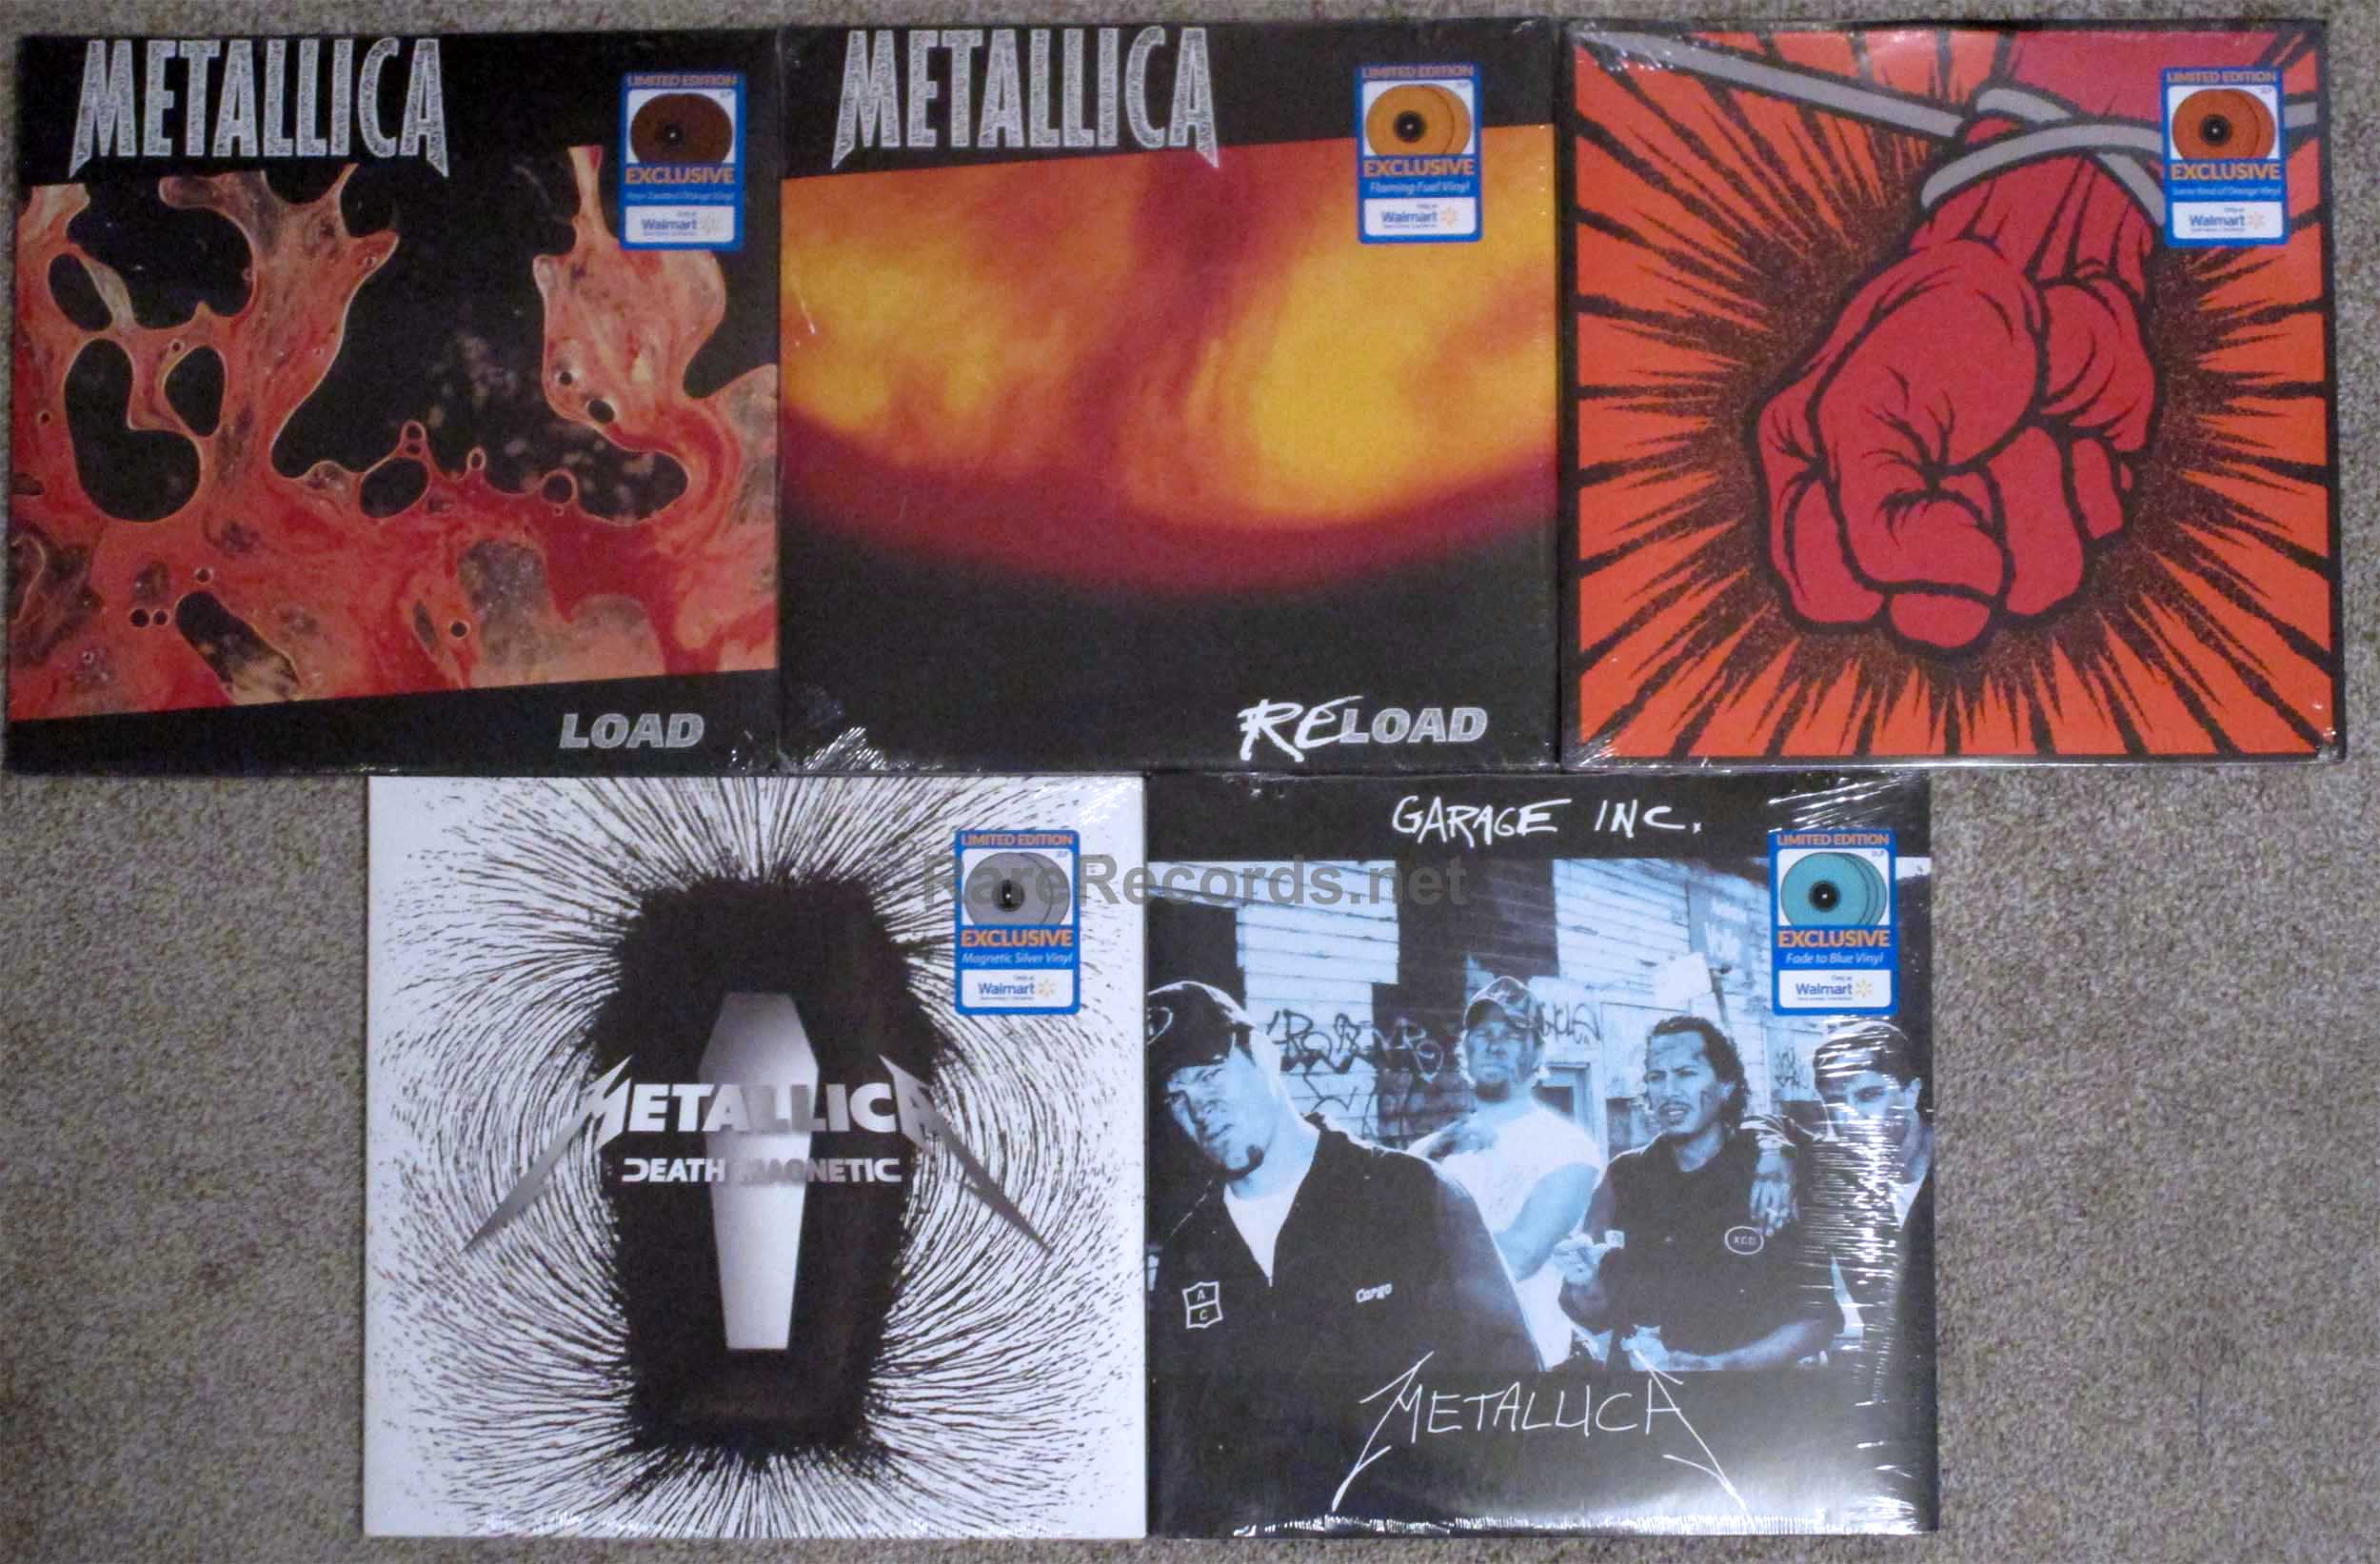 Metallica on X: New & exclusive colored vinyl will be hitting